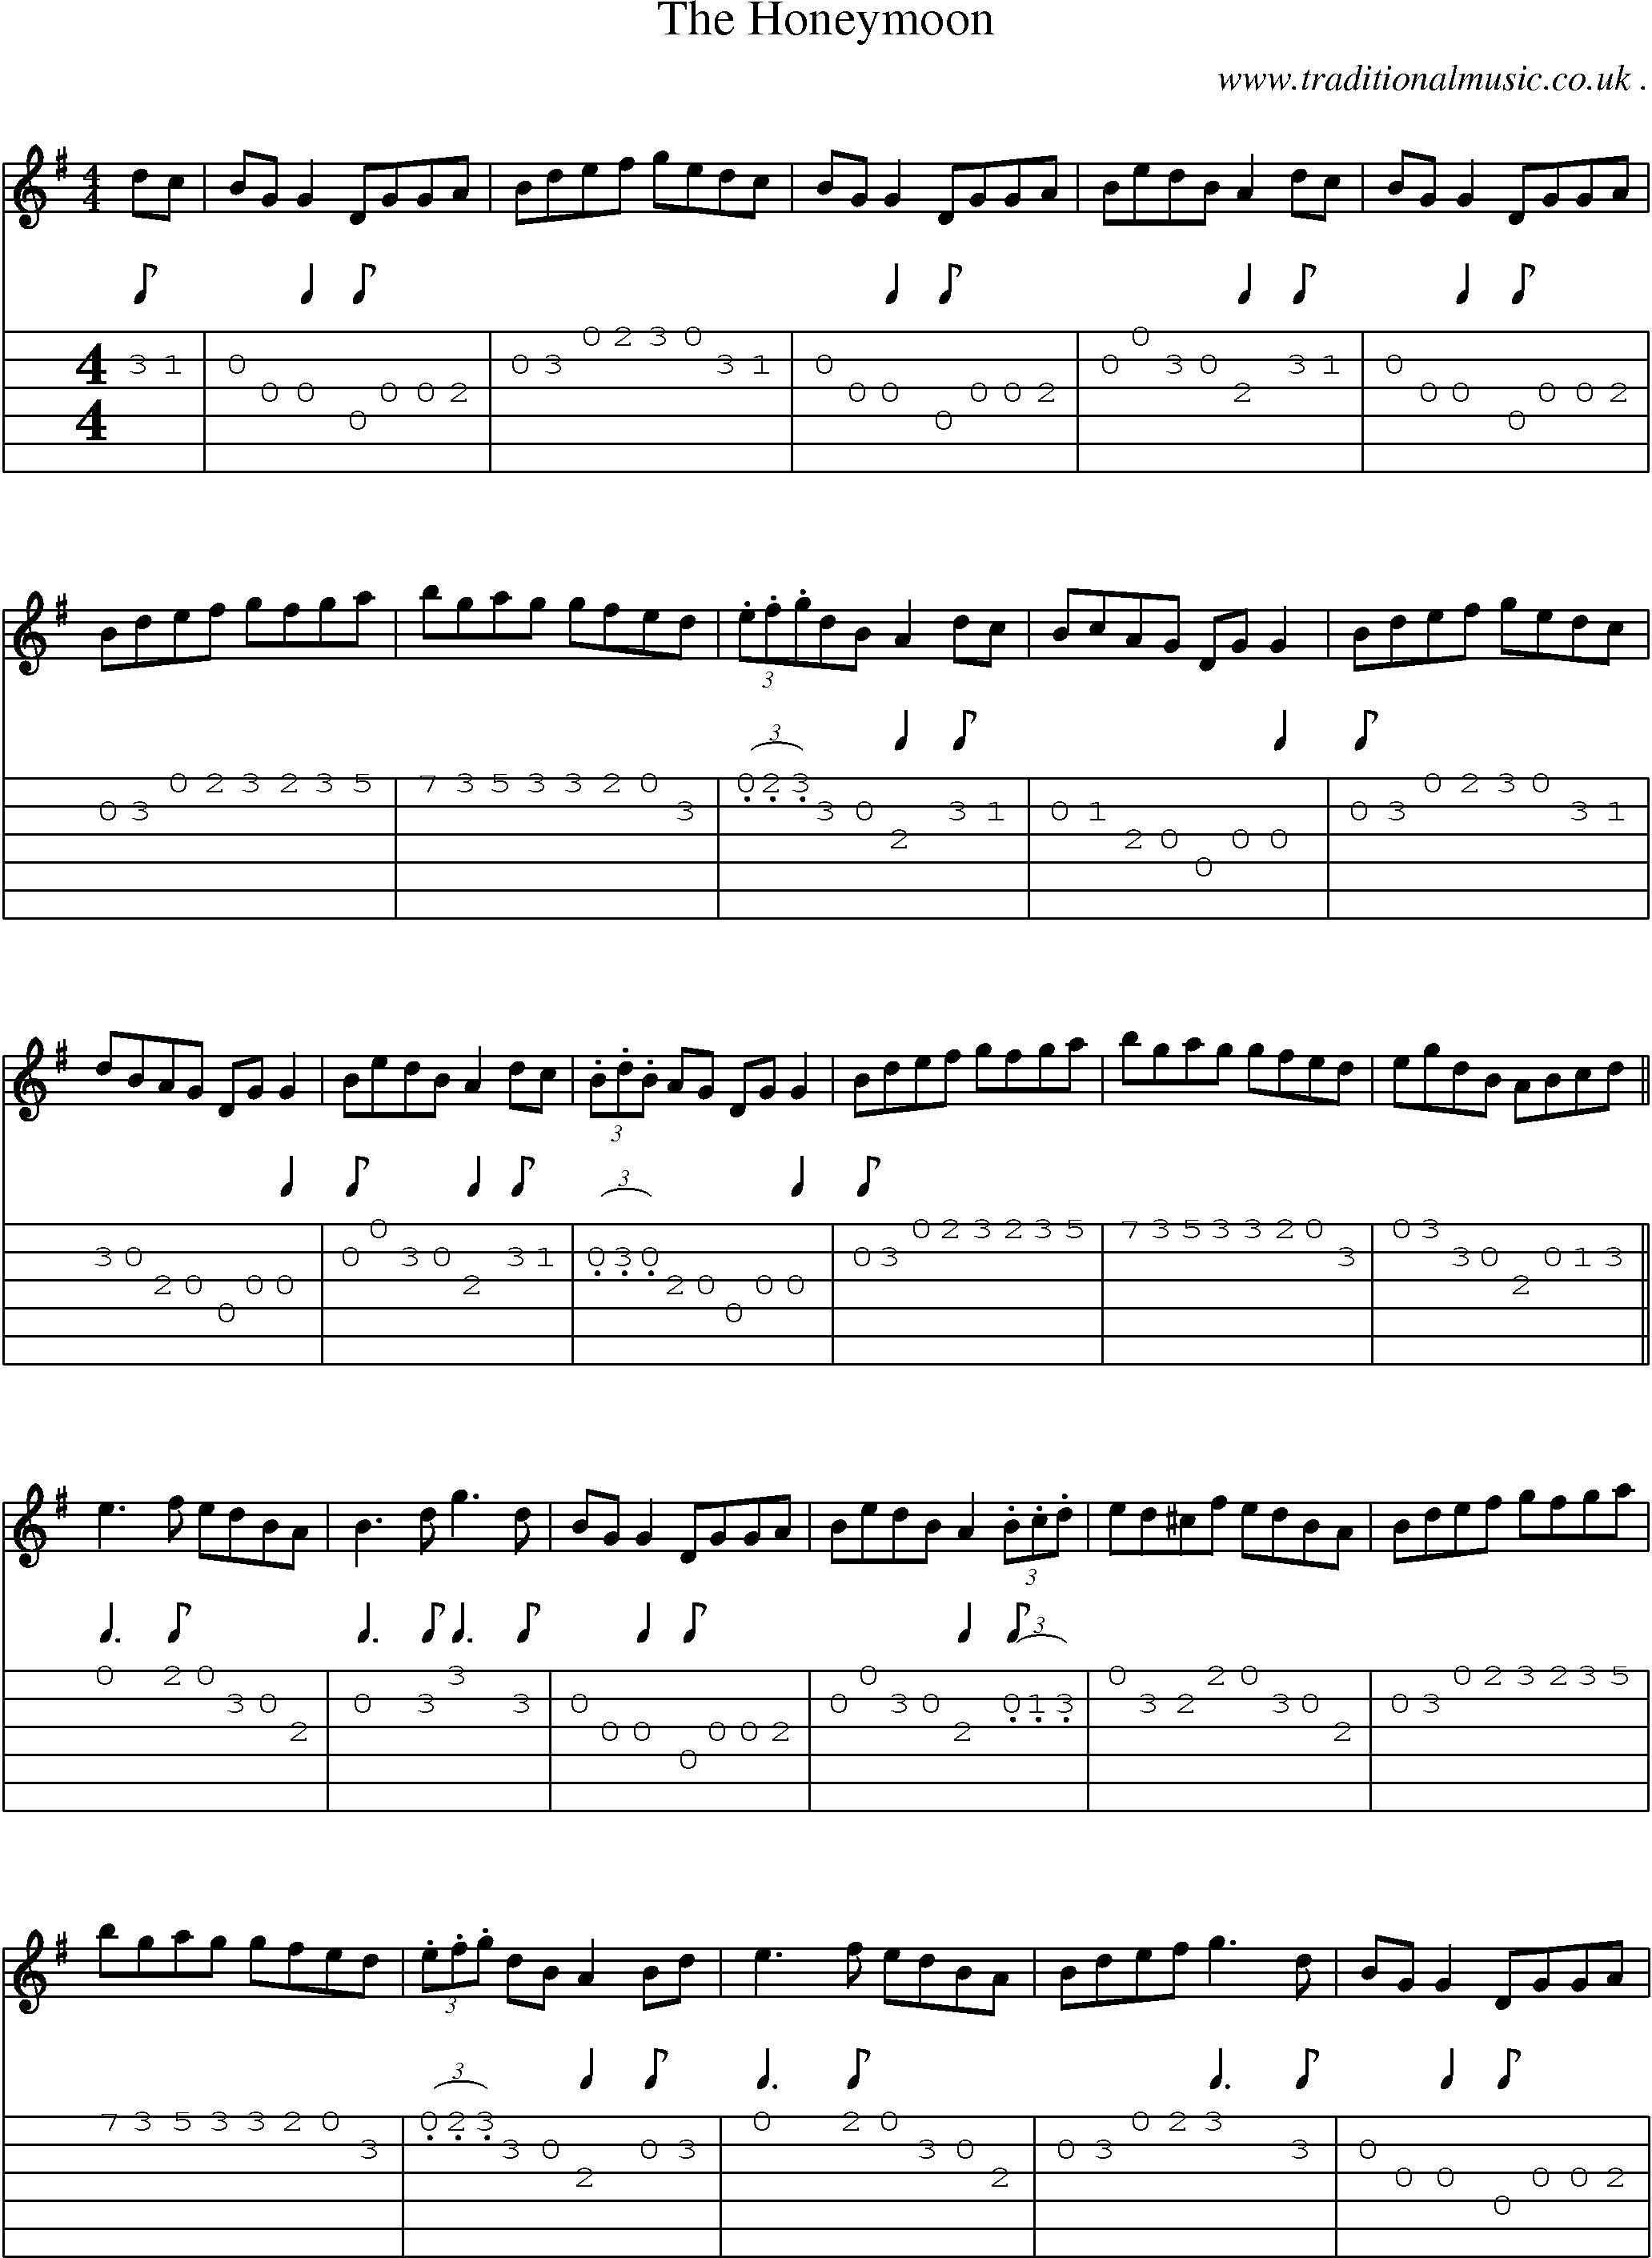 Sheet-Music and Guitar Tabs for The Honeymoon